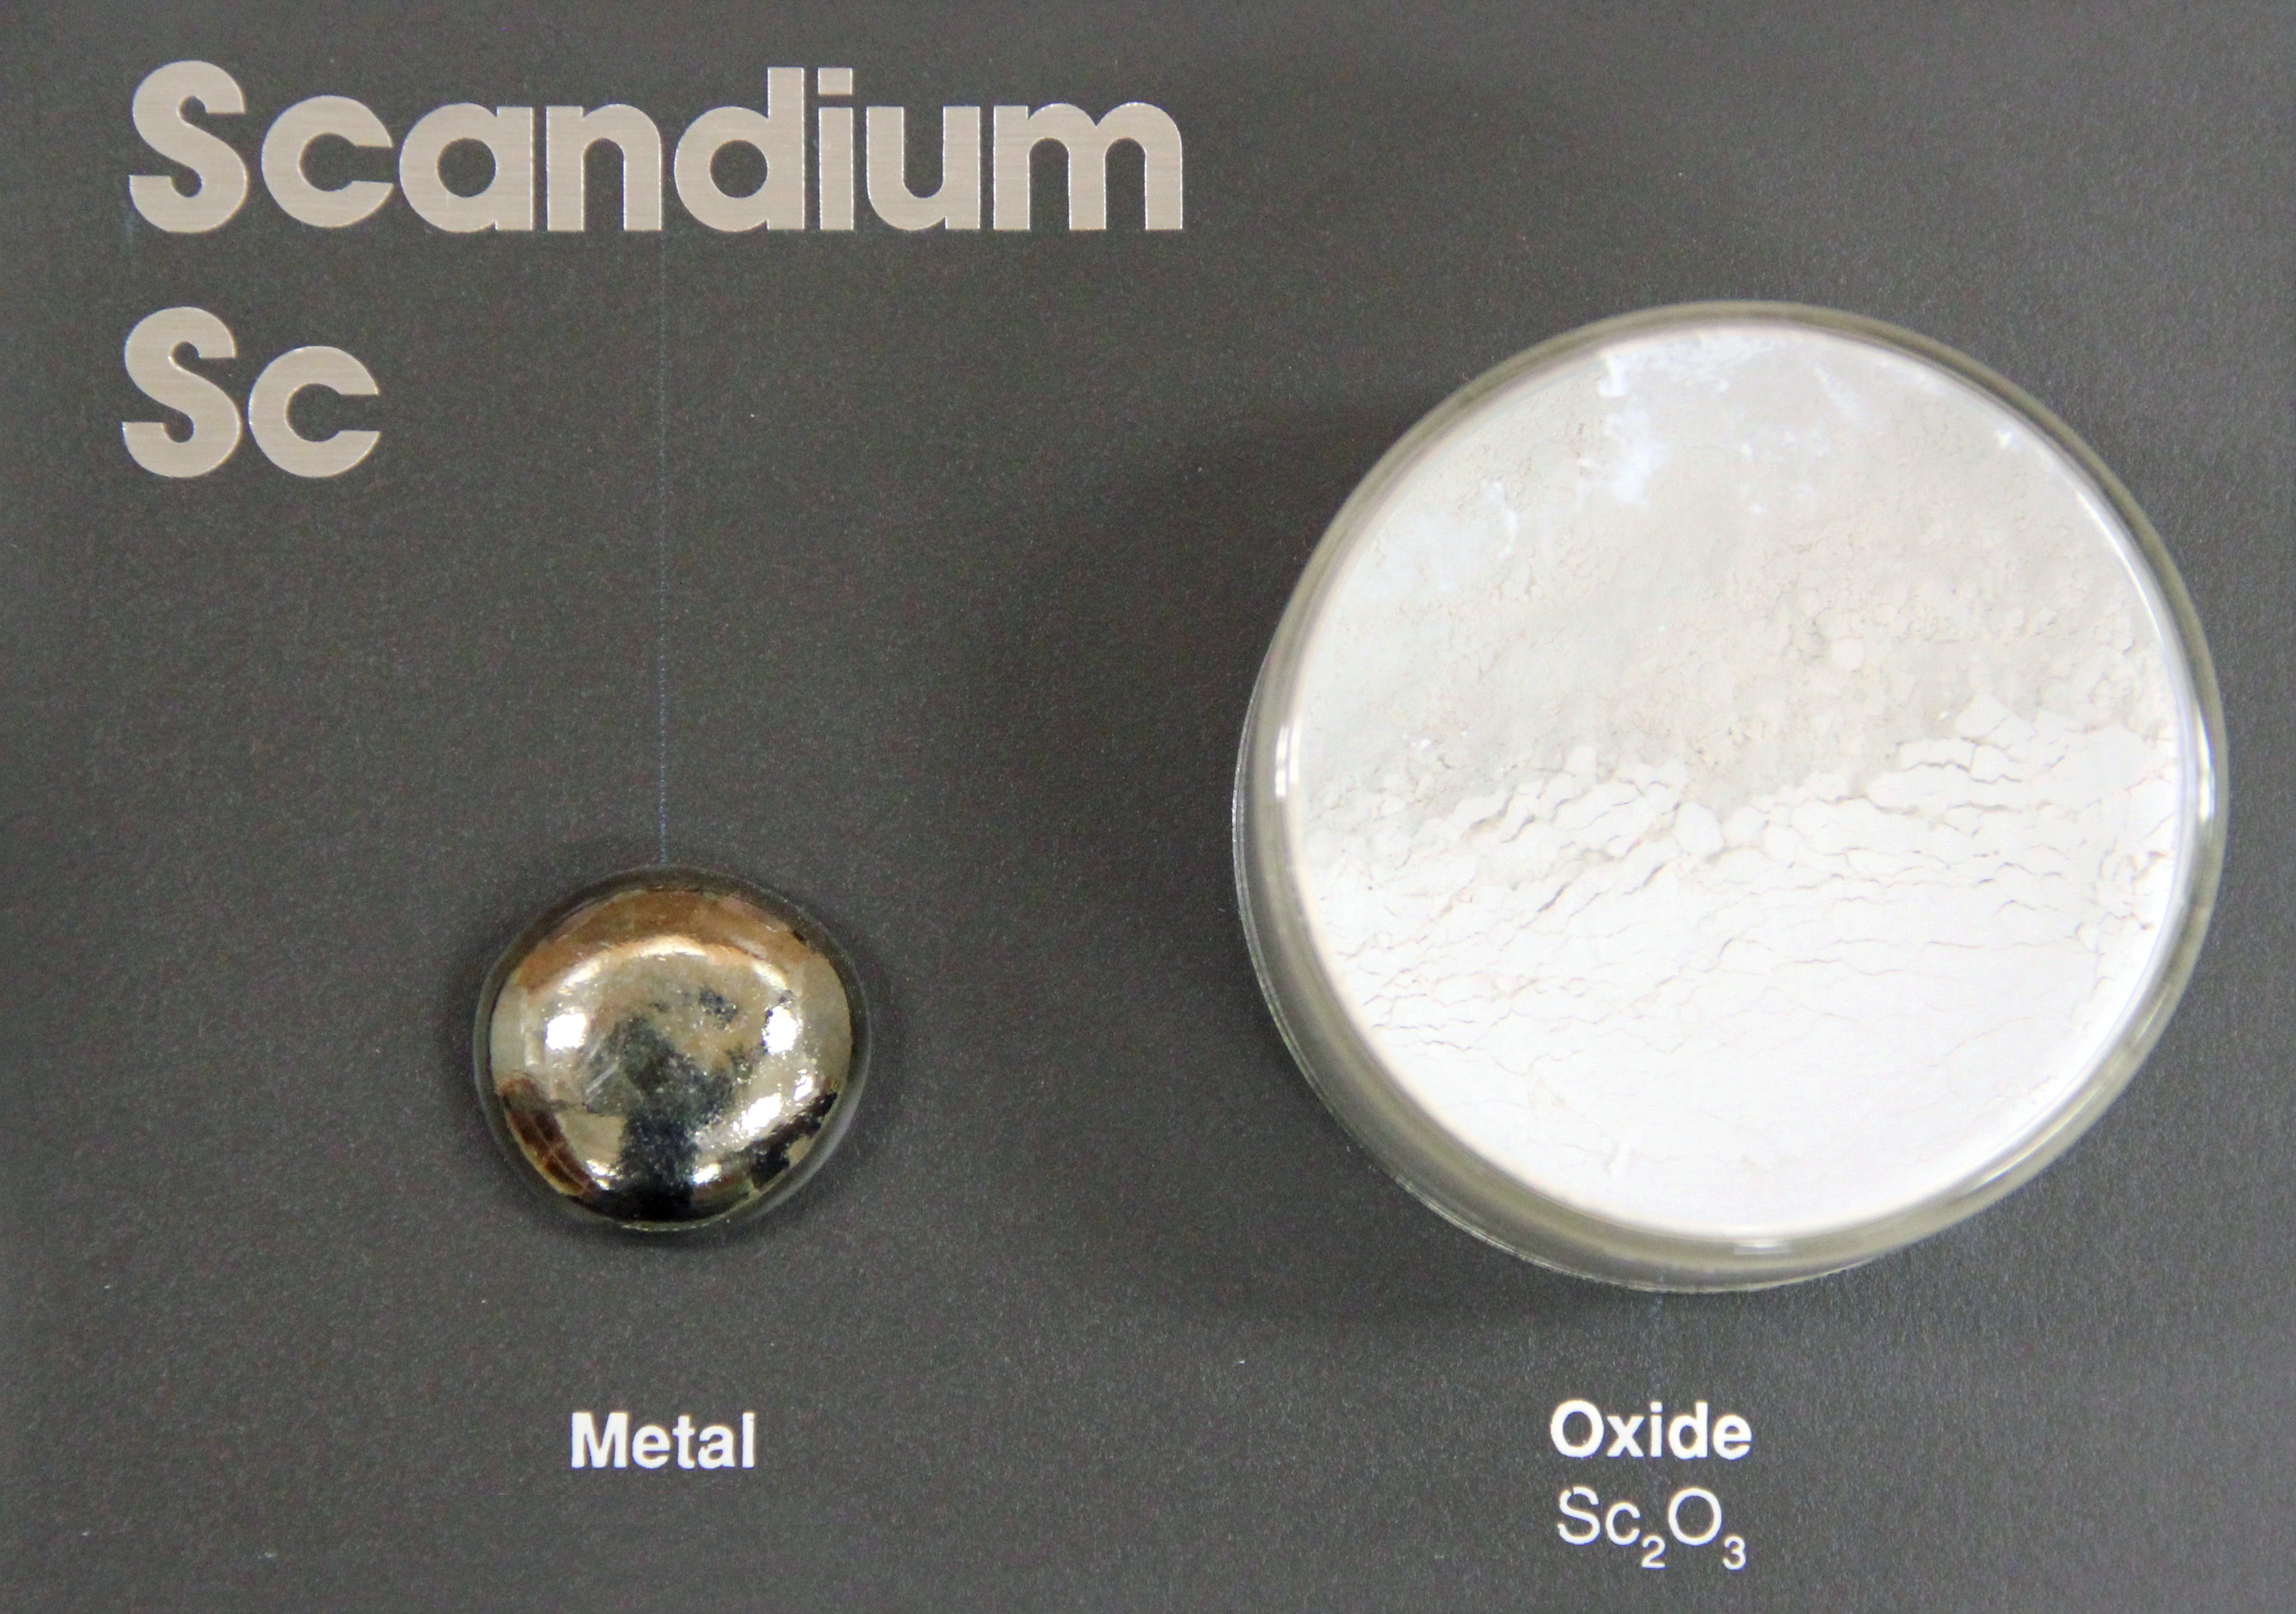 Scandium metal and oxide